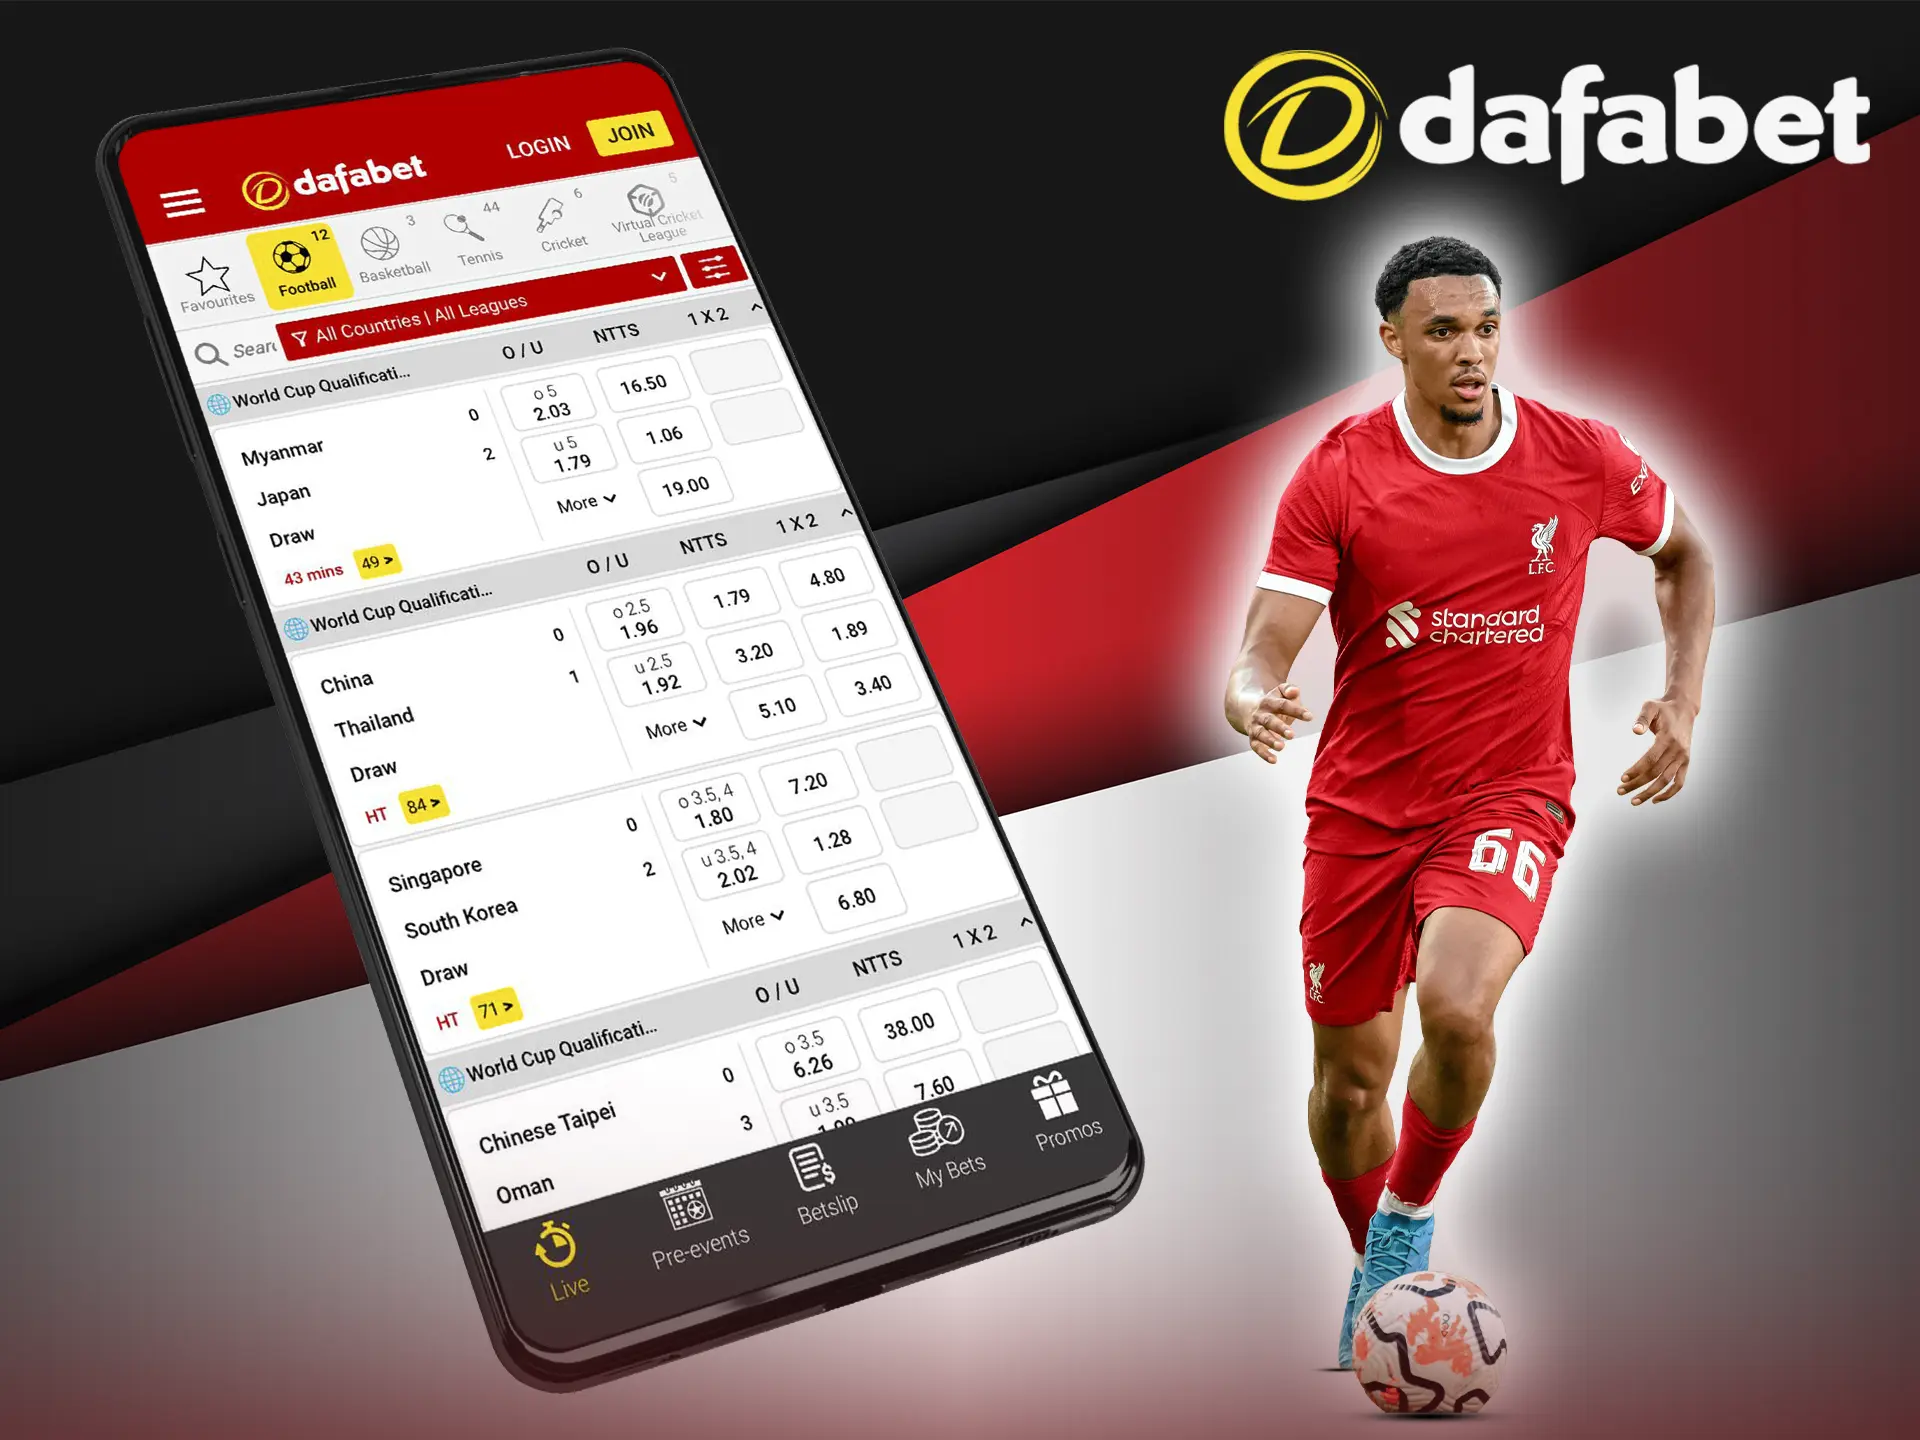 The Dafabet app combines the best protection and lucrative bonuses for football fans.